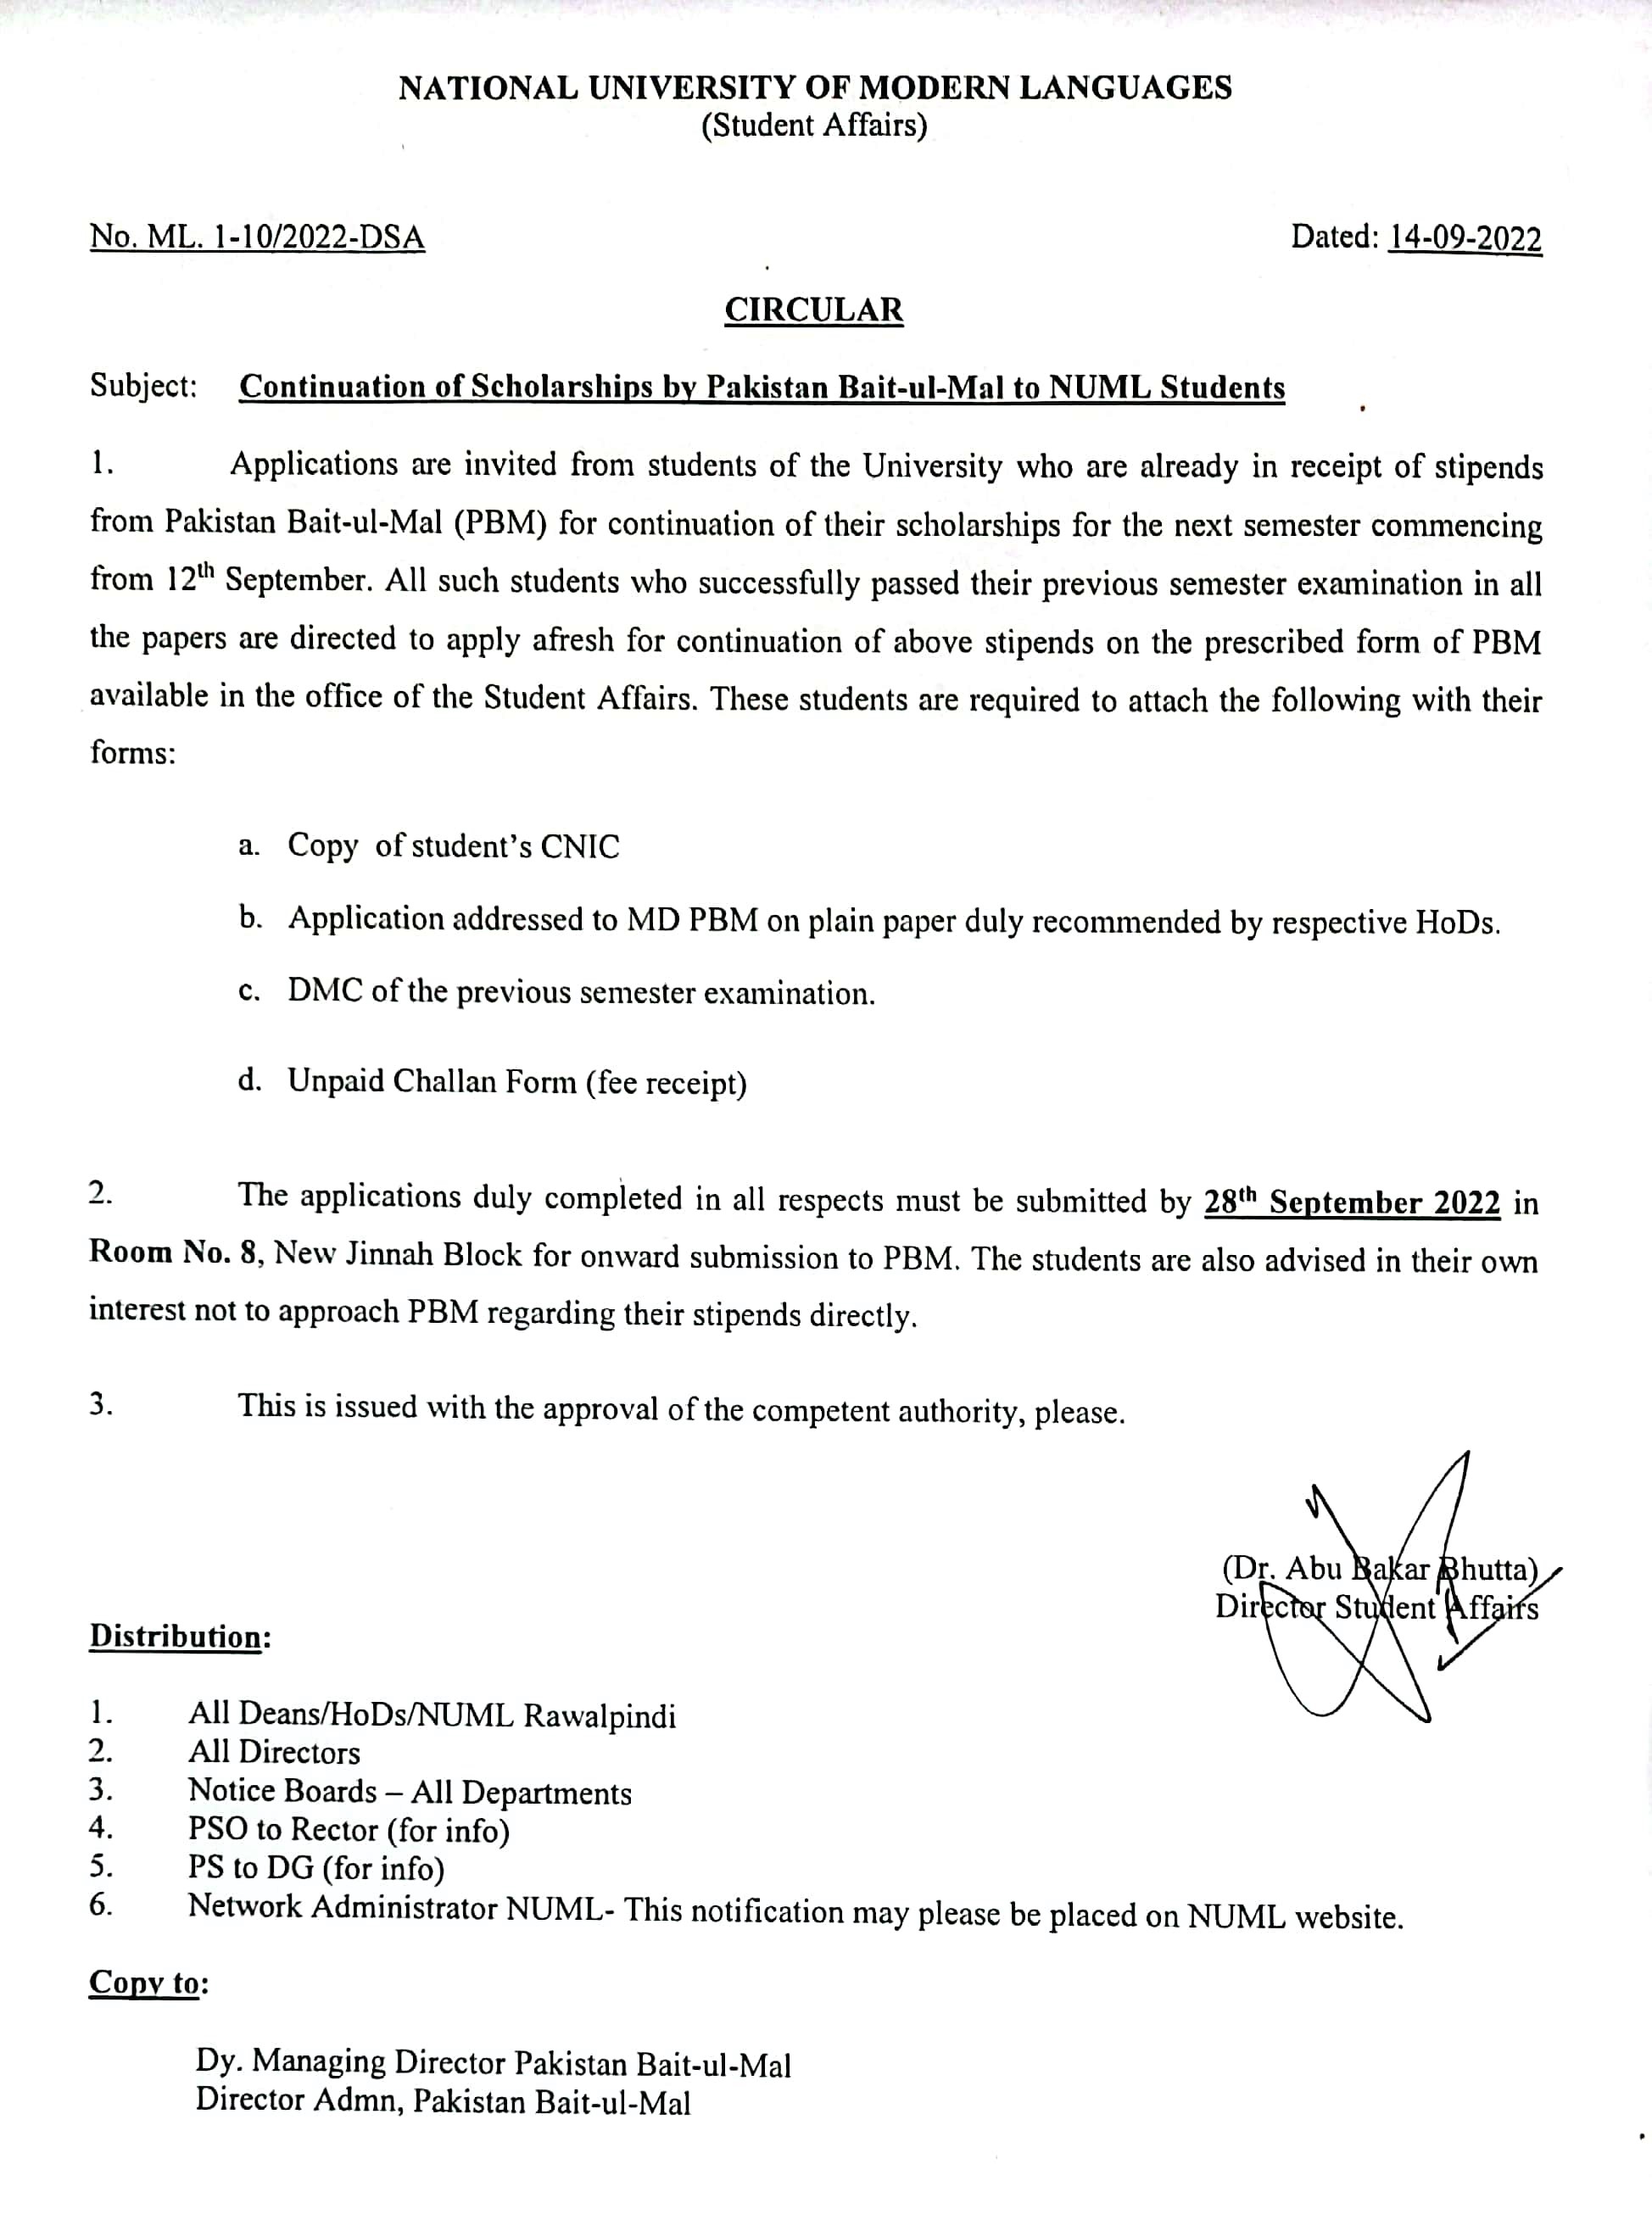 Continuation of Scholarships by Pakistan Bait-ul-Mal to NUML Students